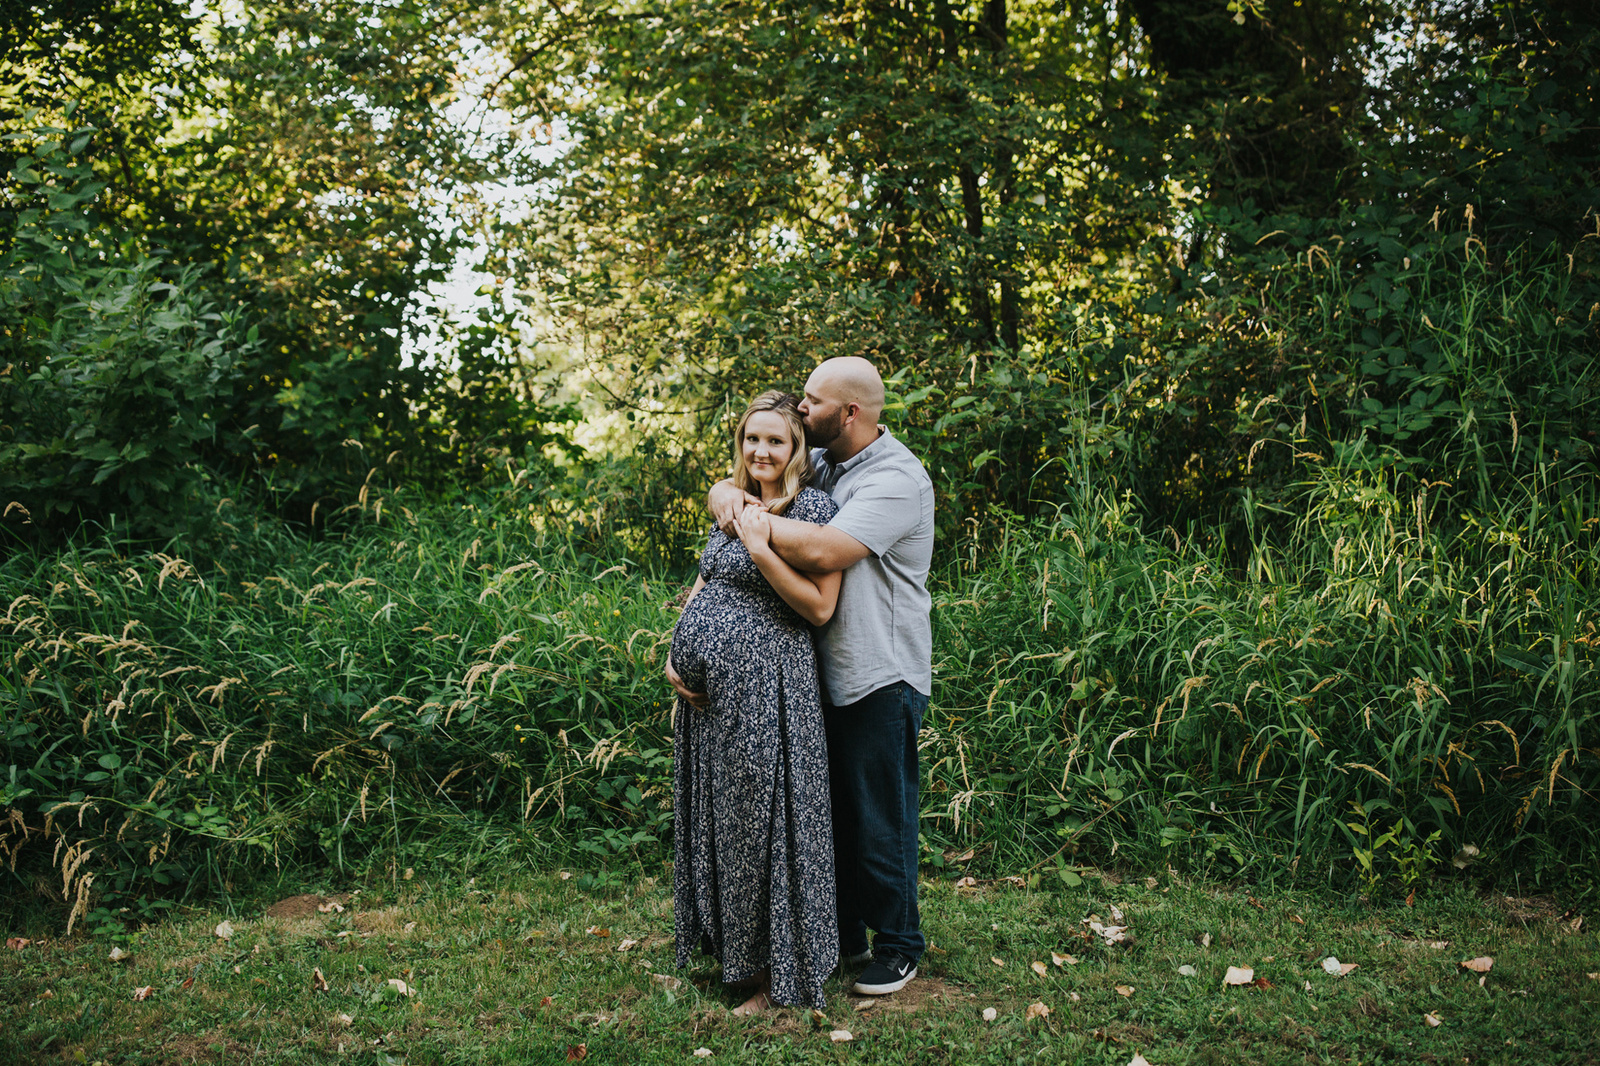 Mom looks at me while partner kisses her head on the farm during their Yamhill, OR maternity session.